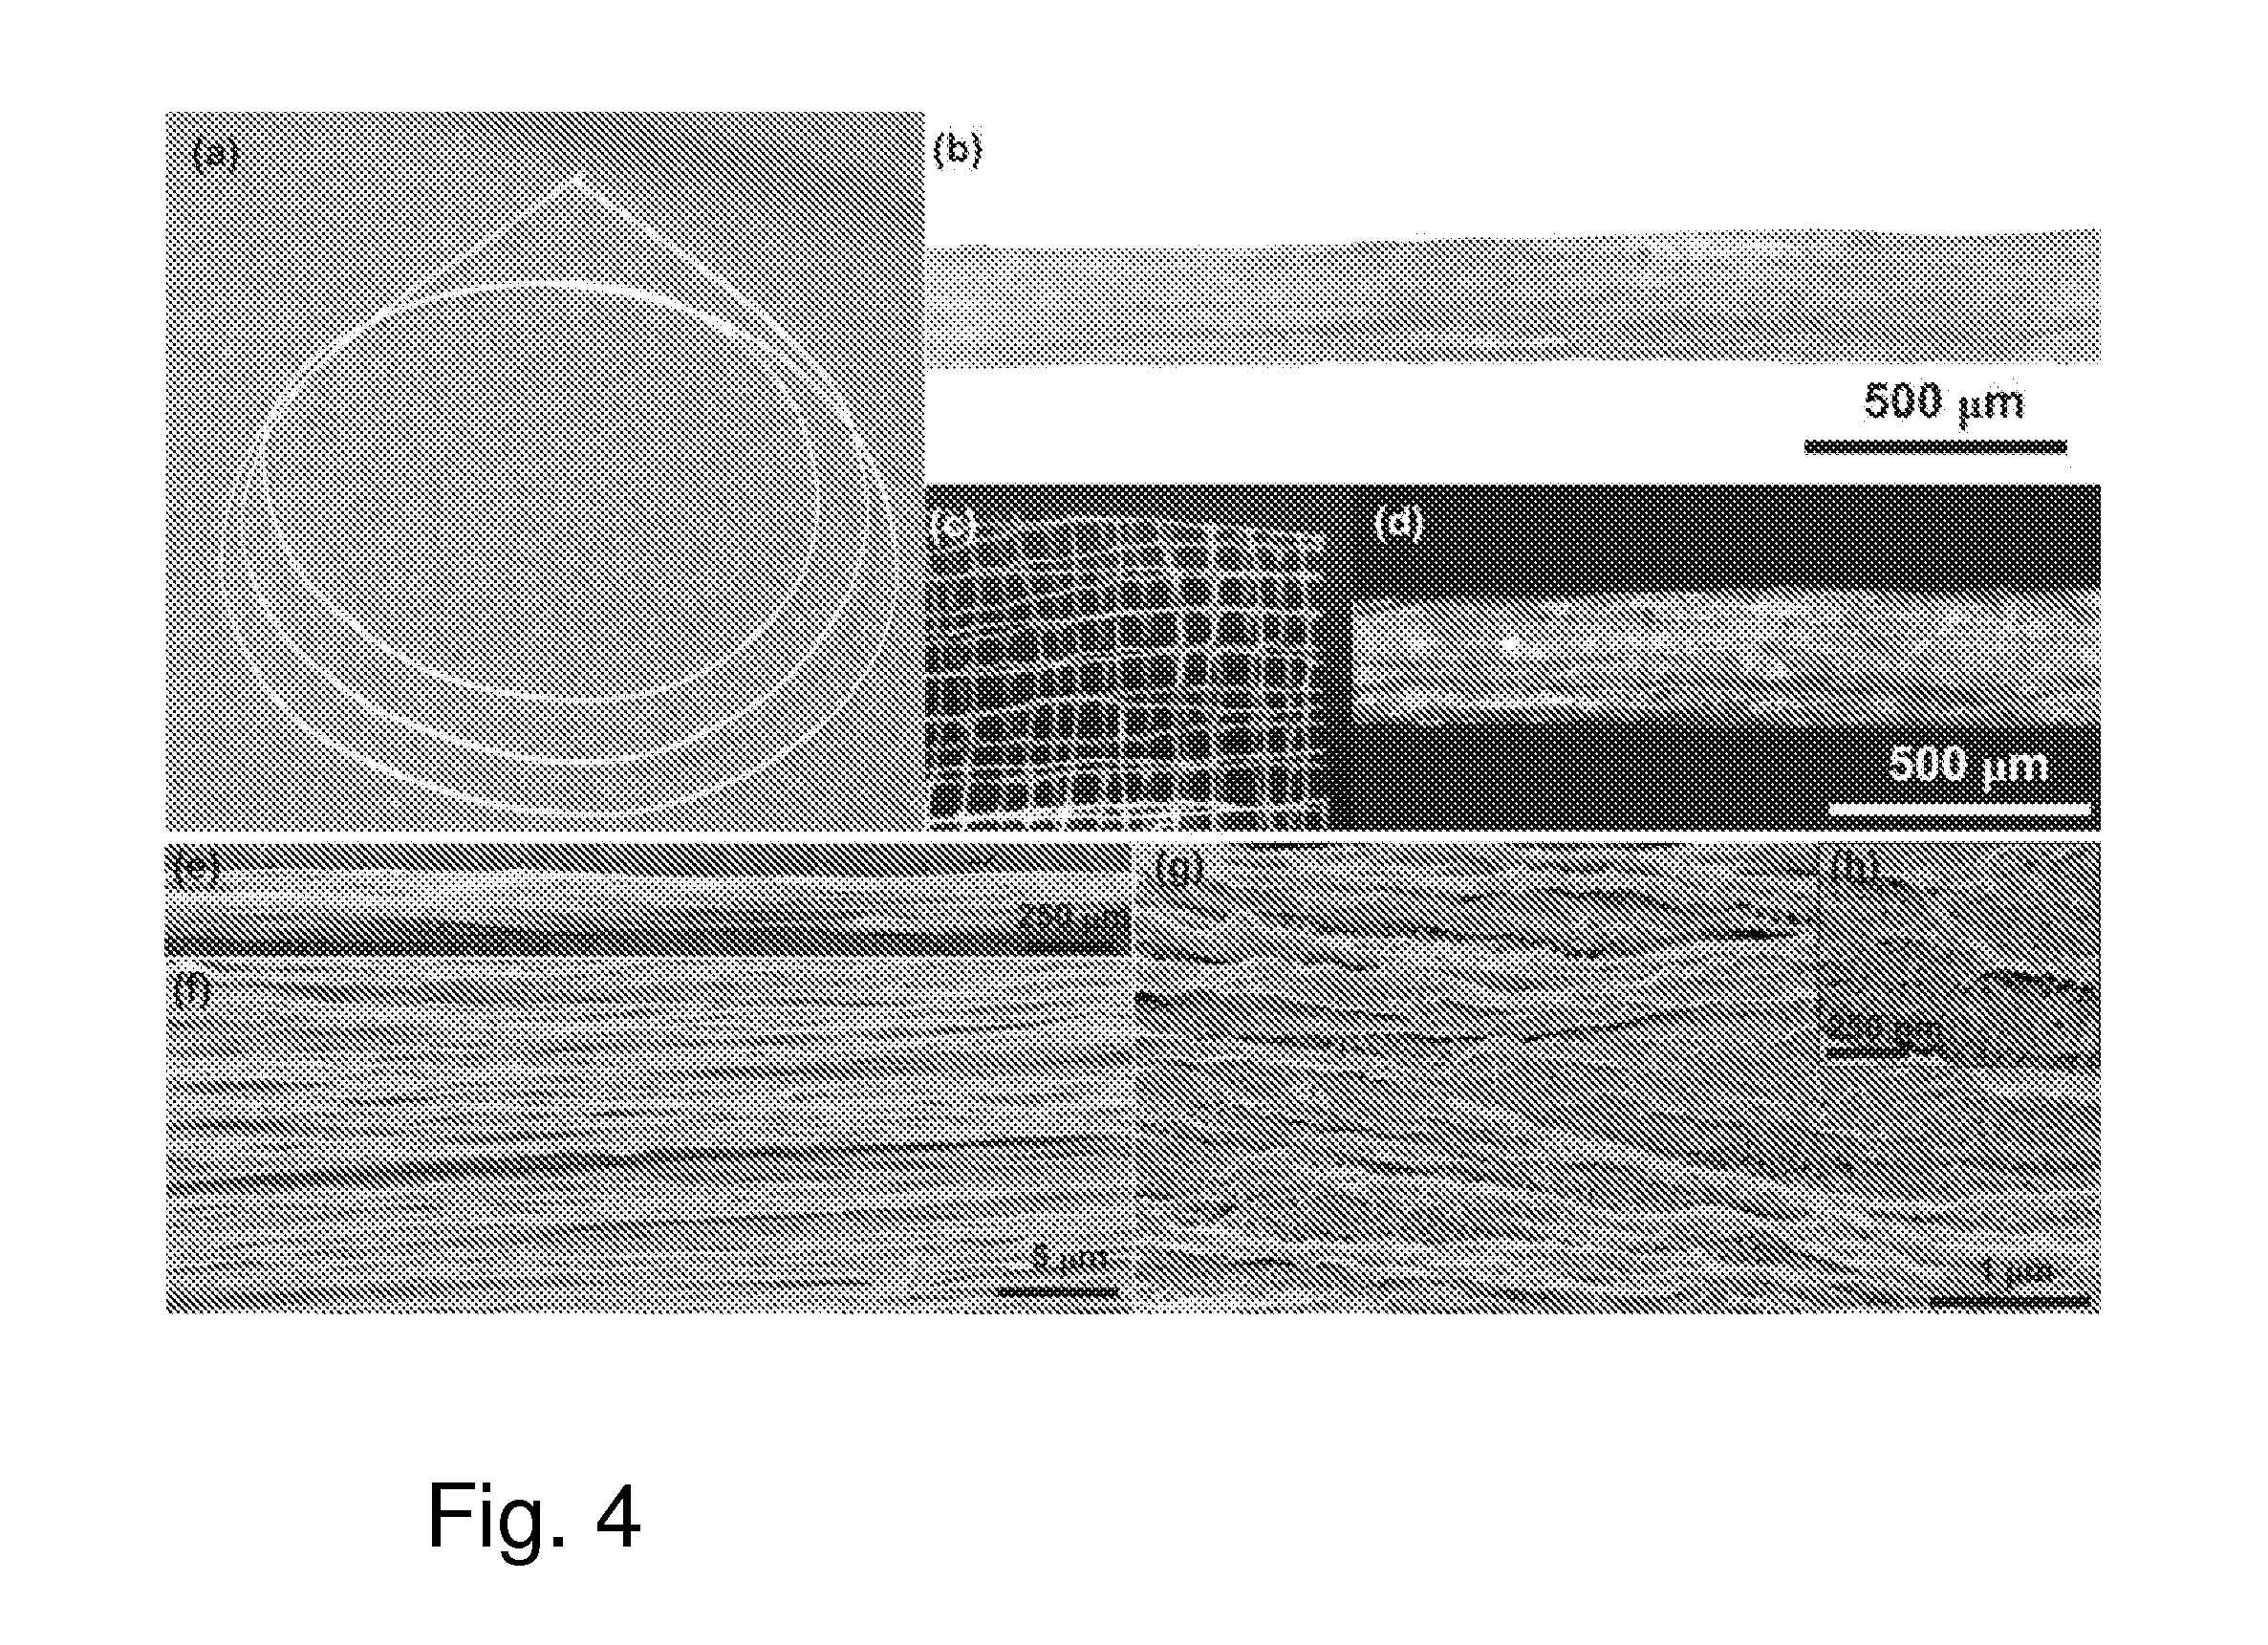 Method for fabricating fiber products and composites